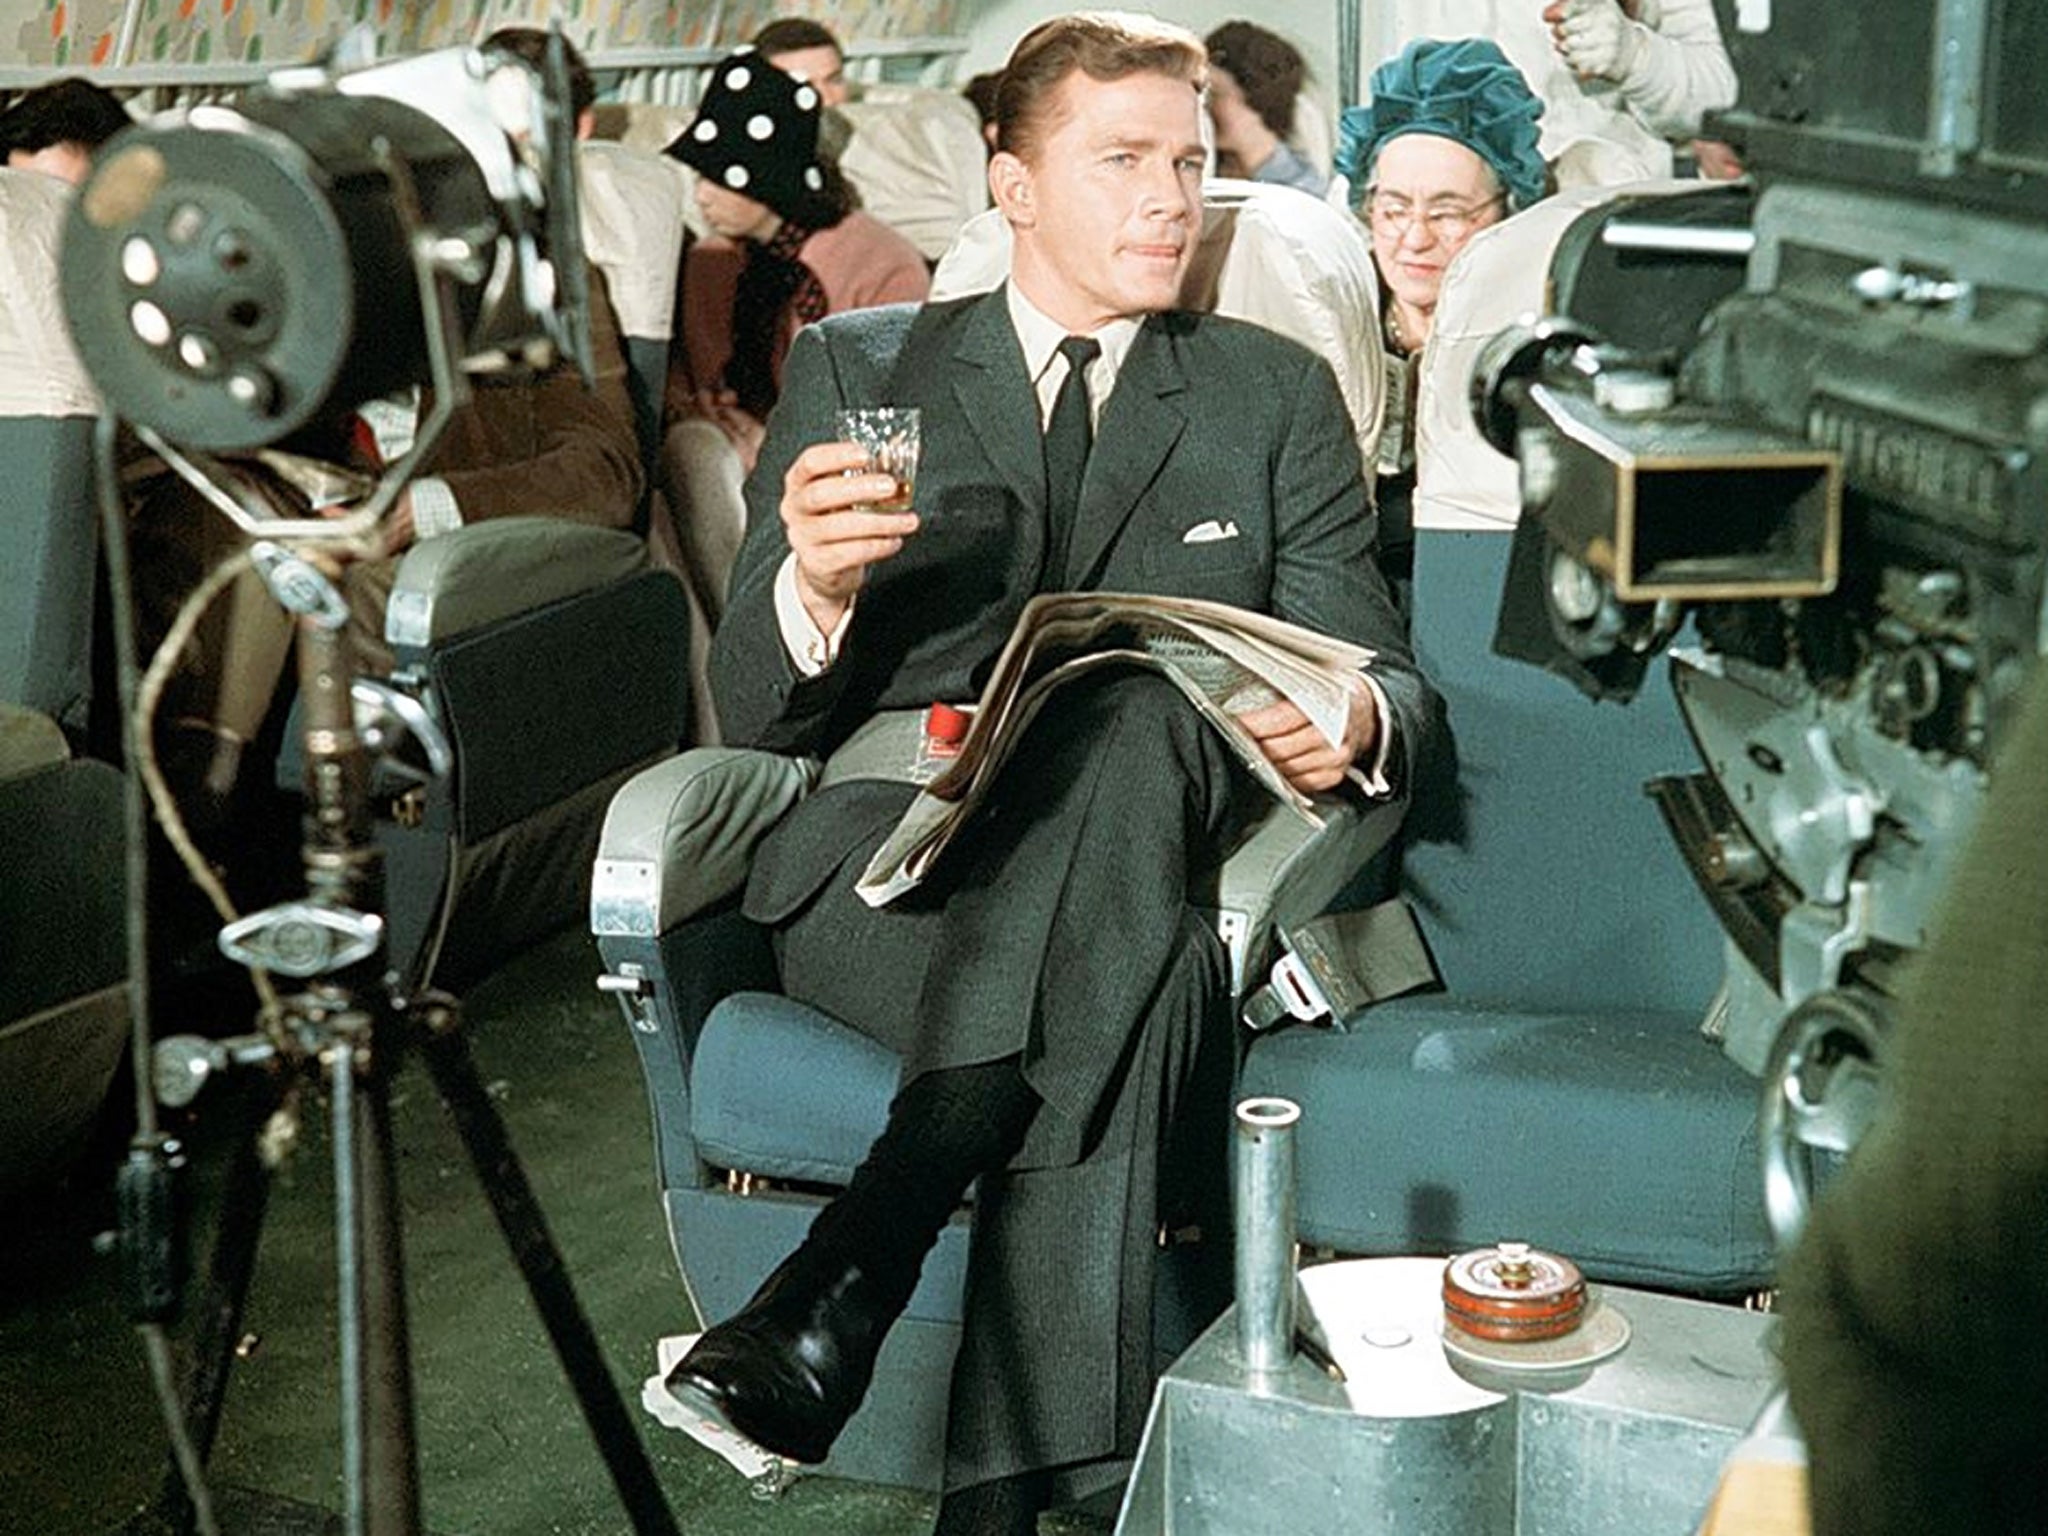 Steve Forrest on the set of 'The Baron' - one of the first colour TV series in Britain